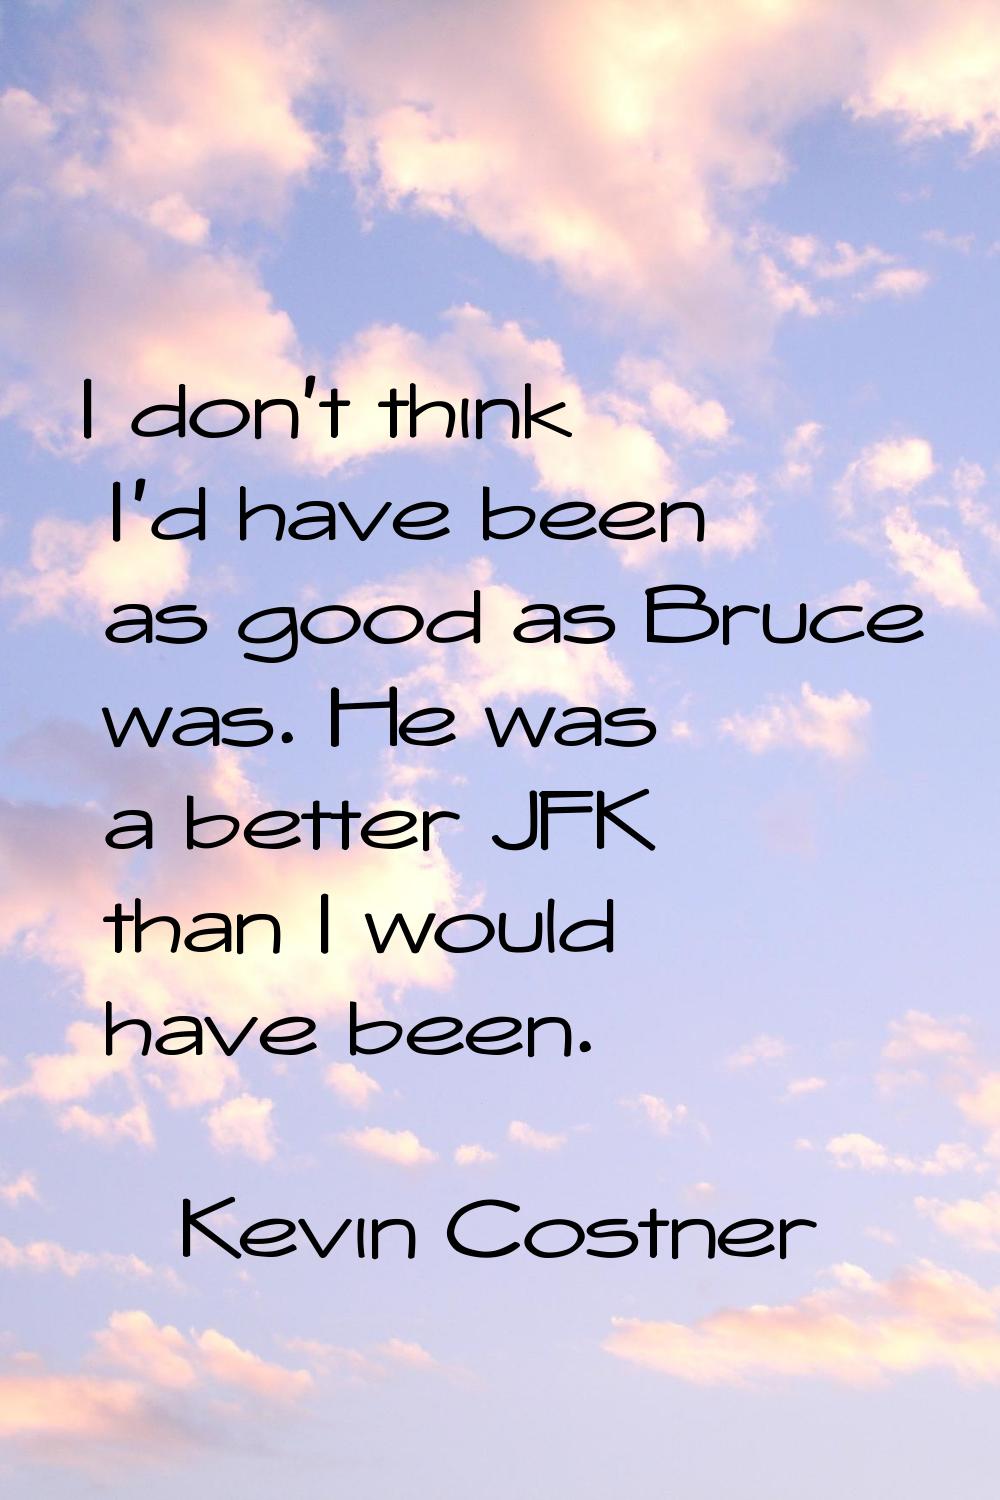 I don't think I'd have been as good as Bruce was. He was a better JFK than I would have been.